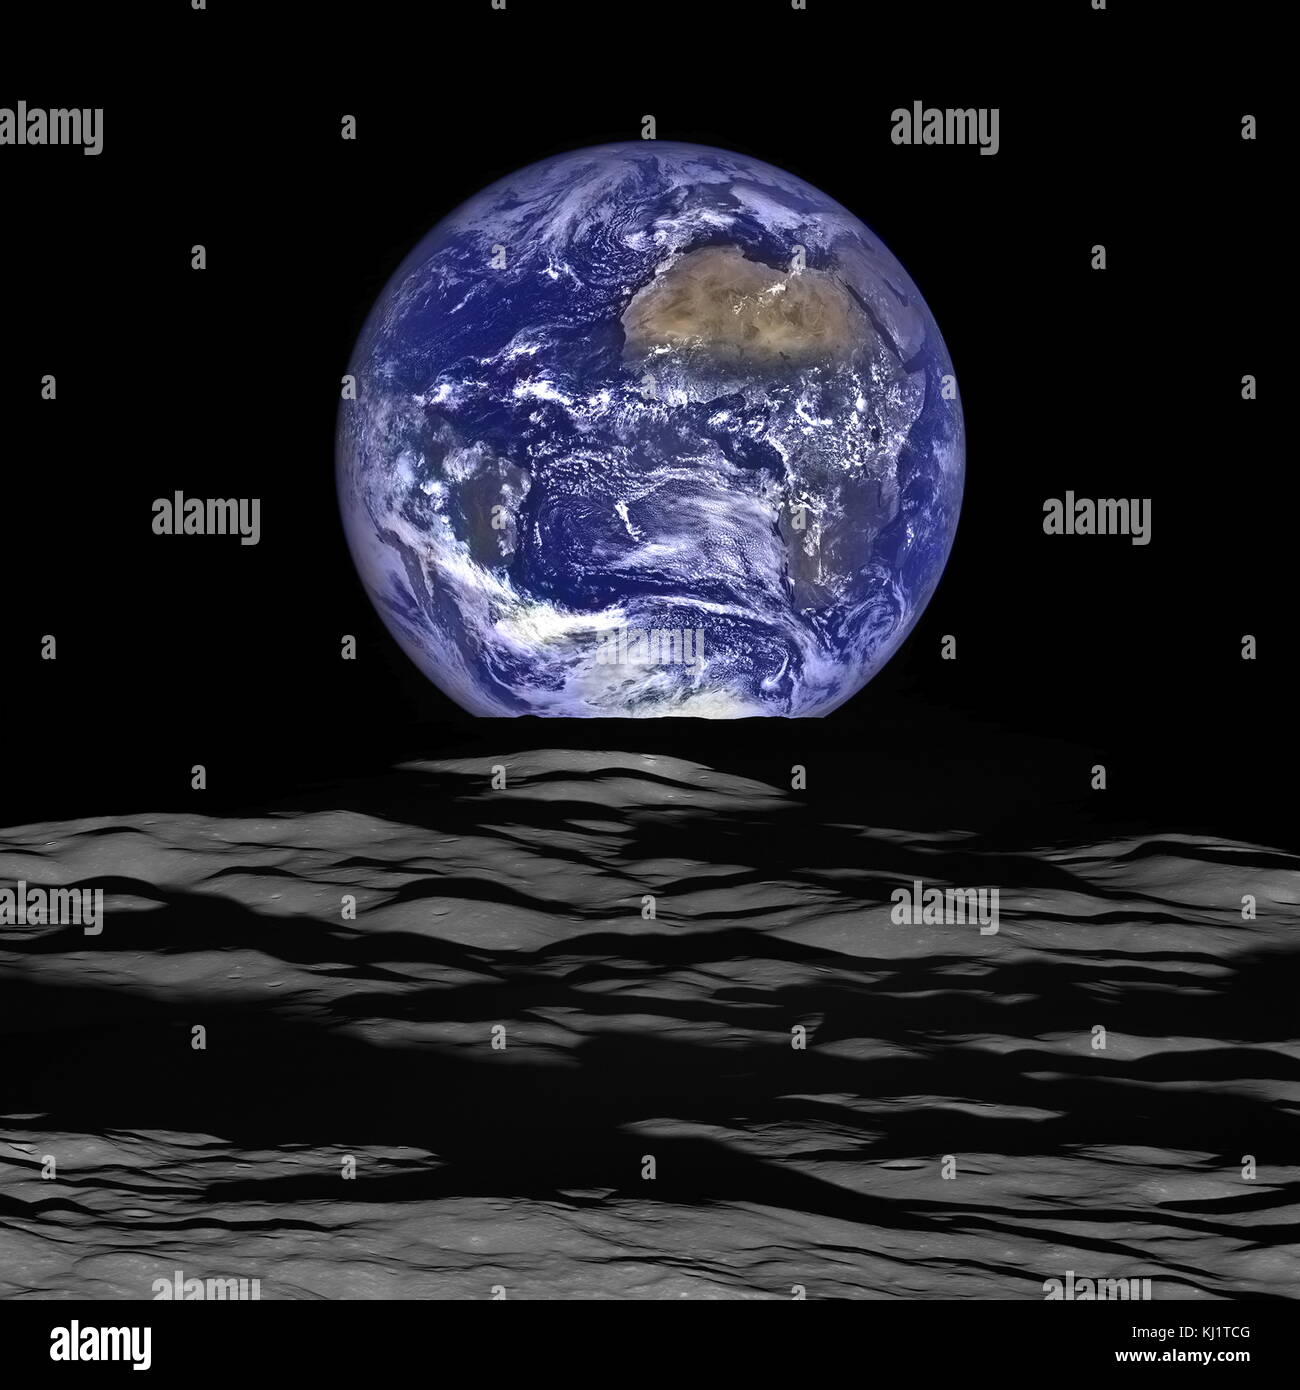 NASA's Lunar Reconnaissance Orbiter (LRO) recently captured a unique view of Earth from the spacecraft's vantage point in orbit around the moon. In this composite image we see Earth appear to rise over the lunar horizon from the viewpoint of the spacecraft, with the center of the Earth just off the coast of Liberia the upper right is the Sahara Desert, and just beyond is Saudi Arabia. The Atlantic and Pacific coasts of South America are visible to the left Stock Photo